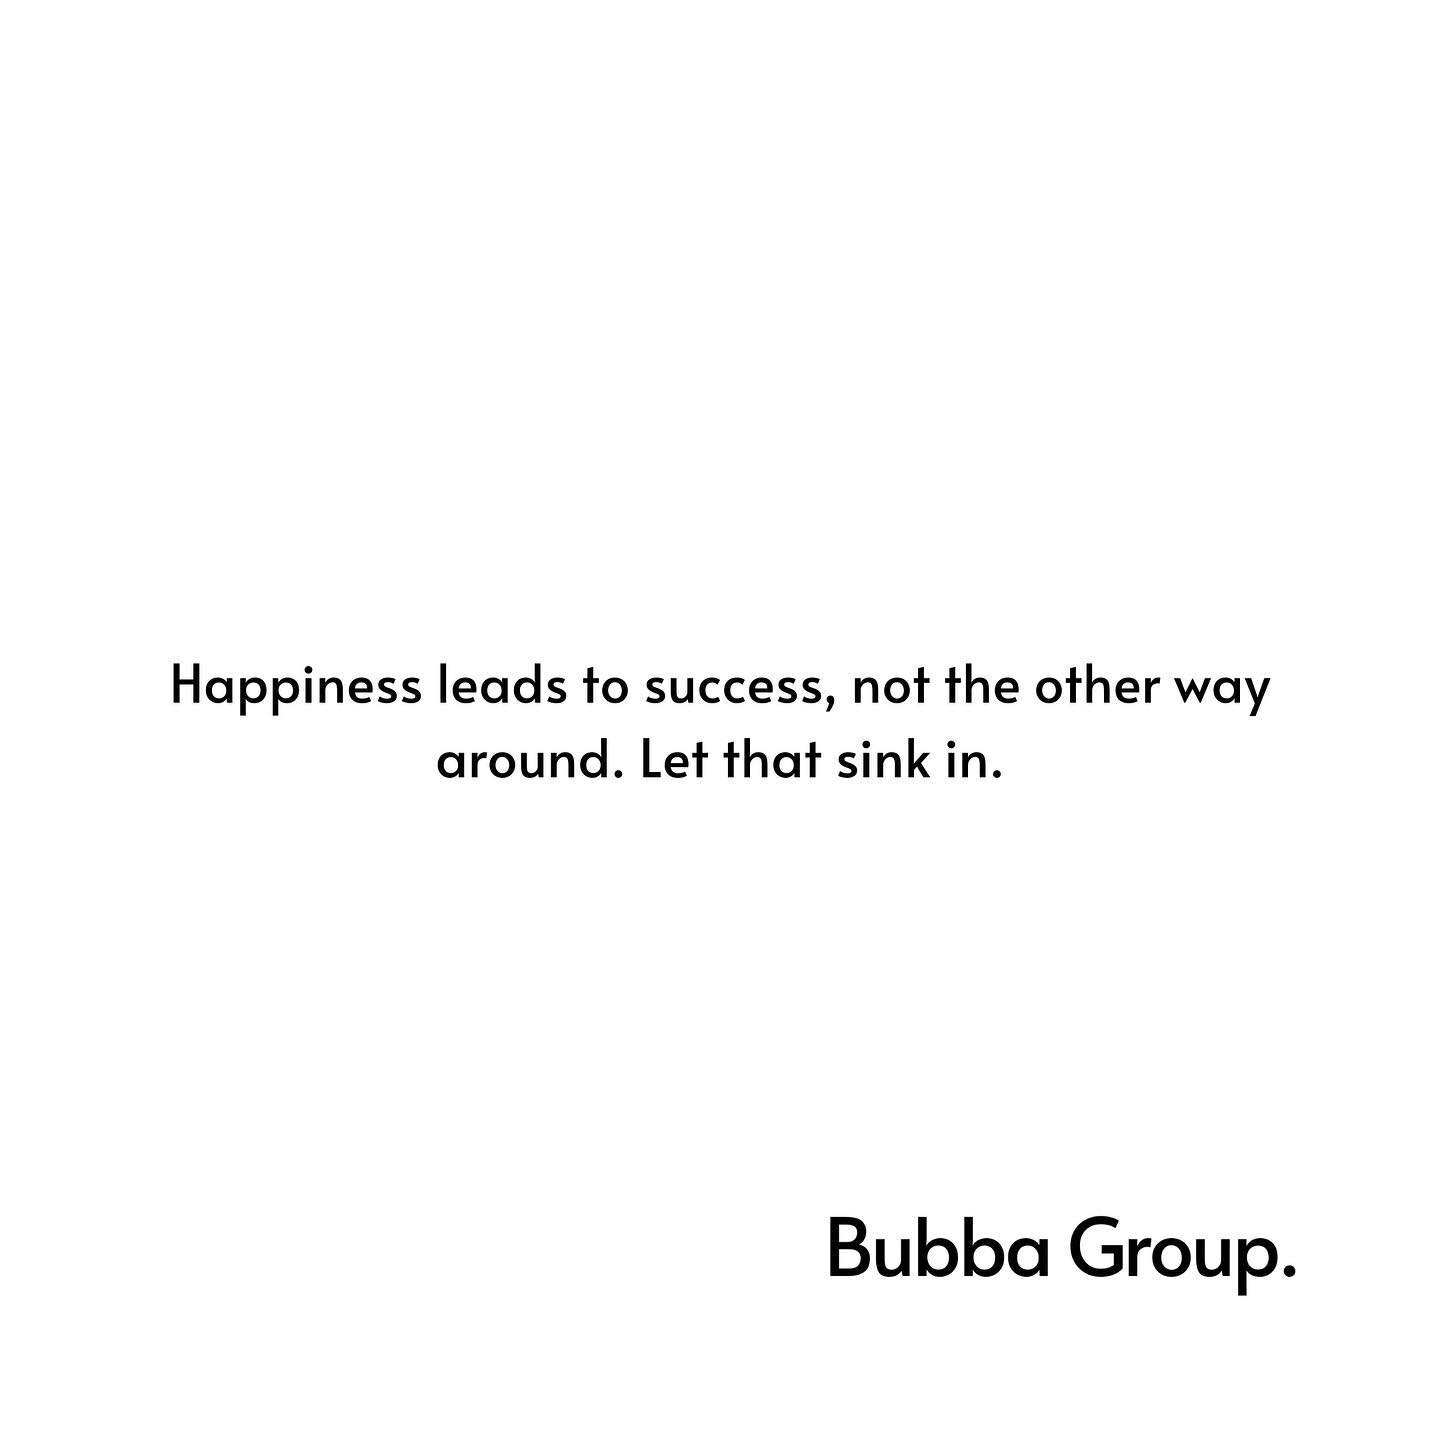 Happiness leads to success, not the other way around. Let that sink in.

#bubbagroup #winnersculture